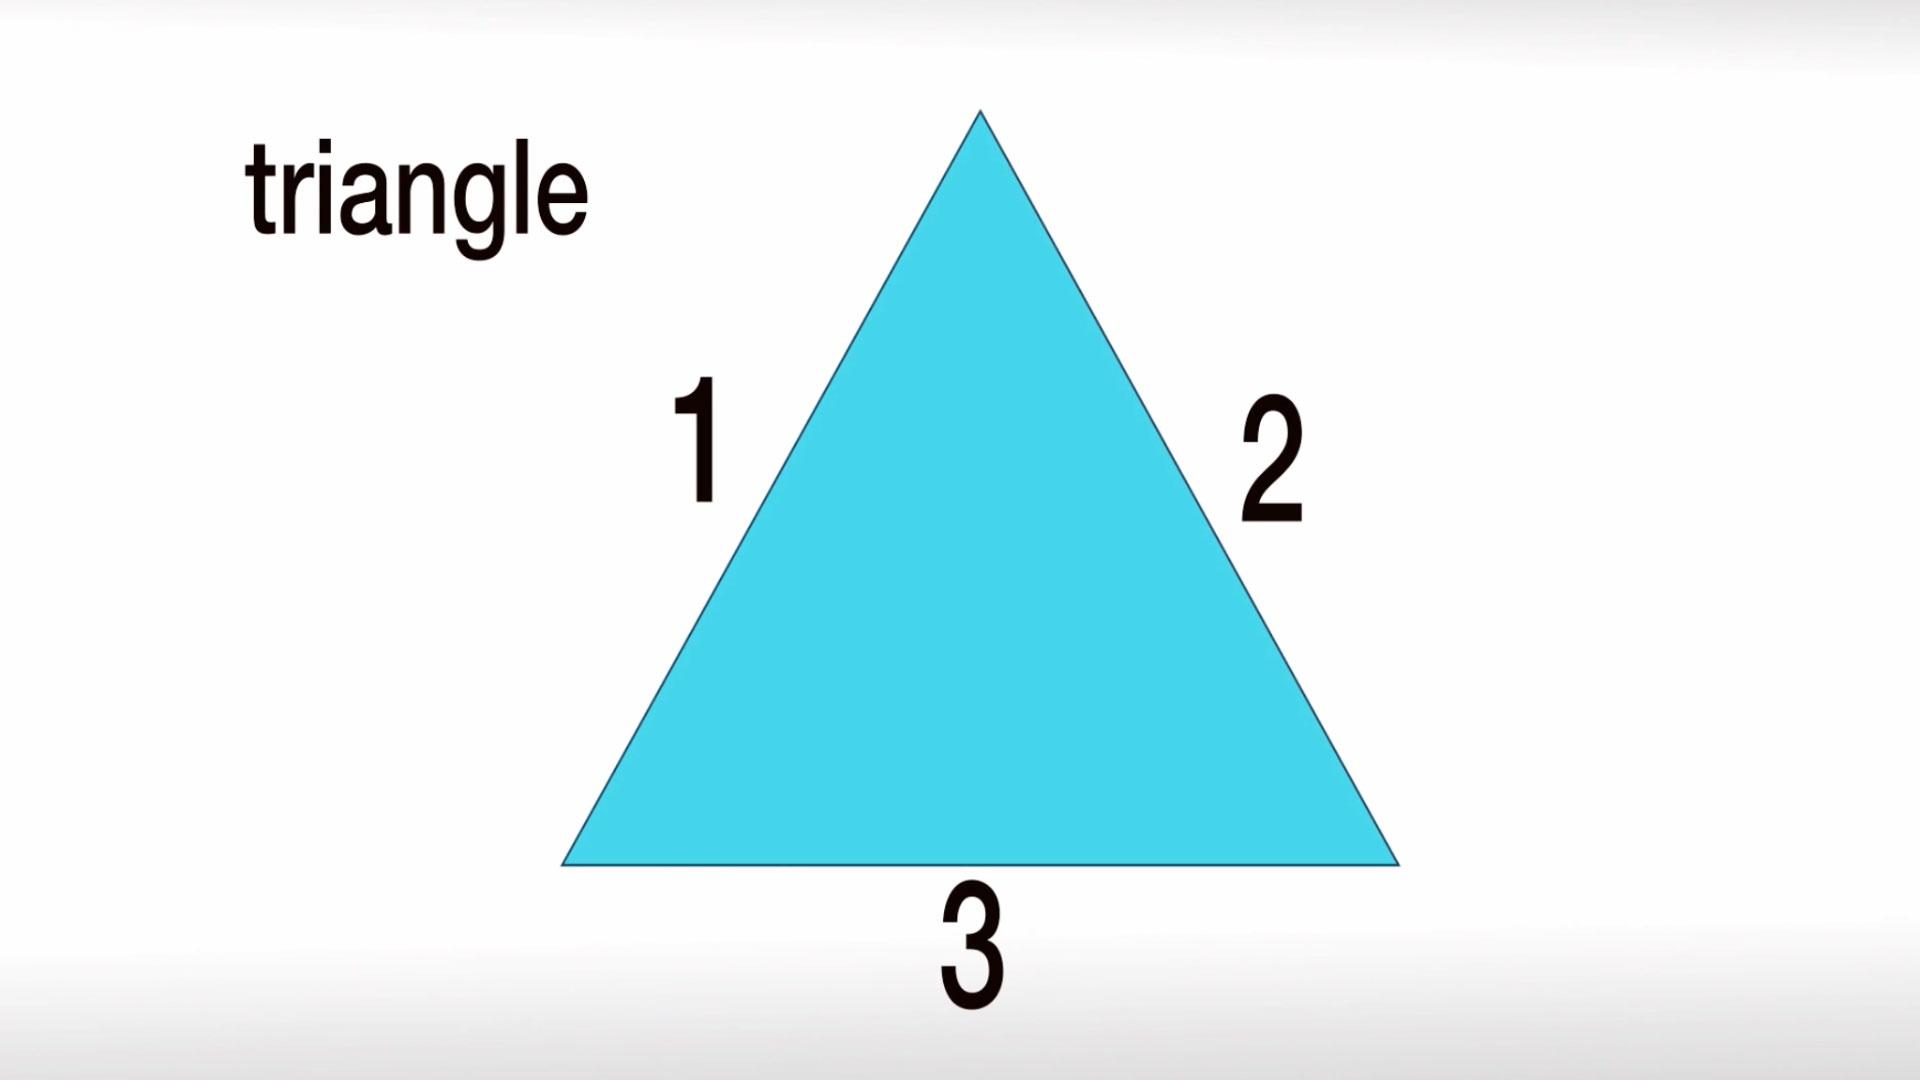 A blue triangle with sides numbered 1, 2, and 3.